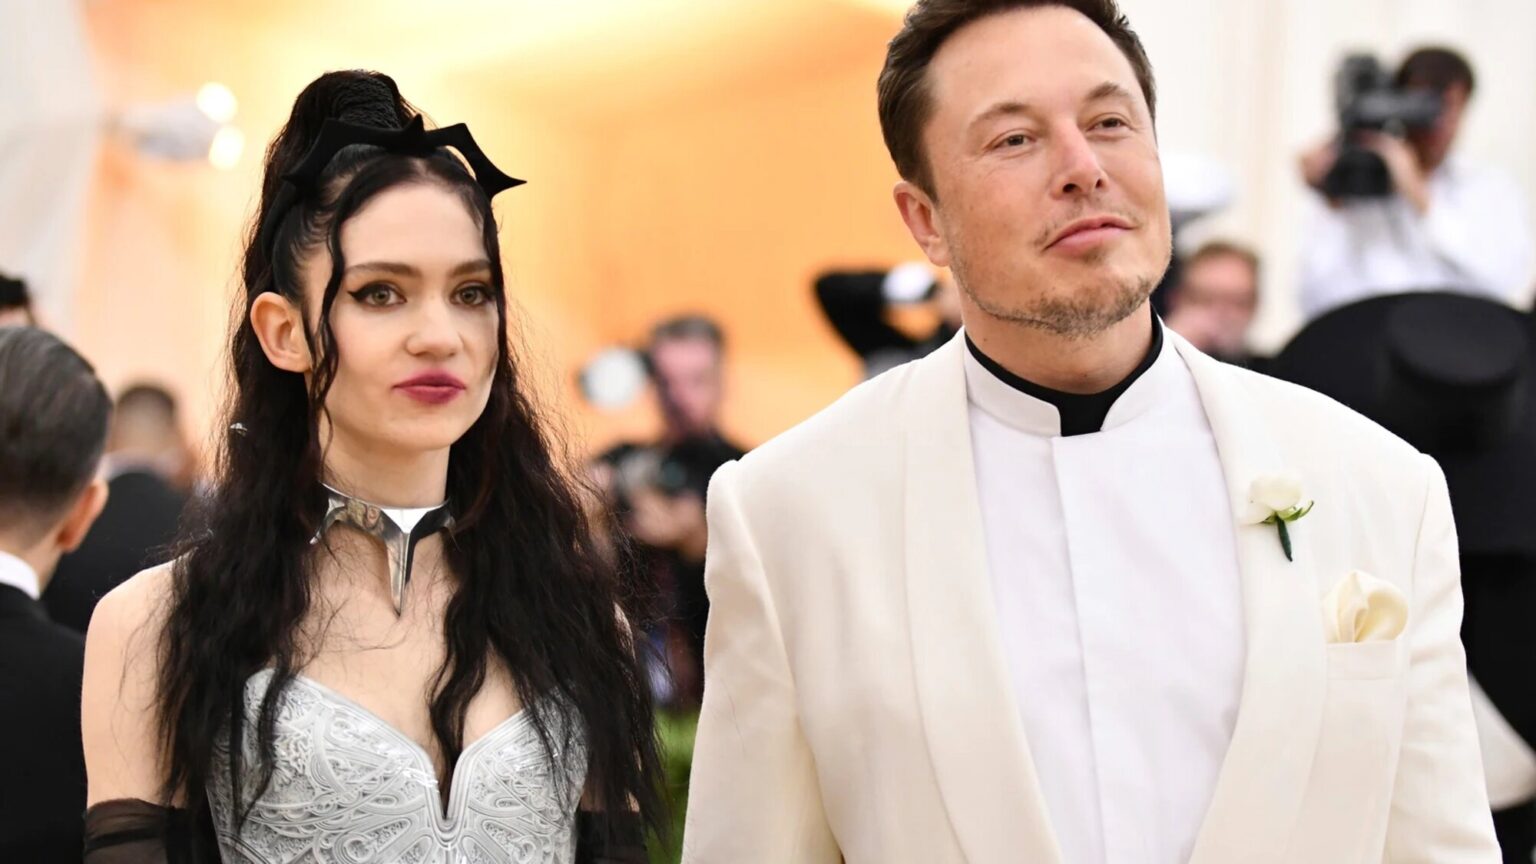 Tech giant Elon Musk and singer Grimes have officially ended their relationship. See why Grimes will never be the wife of Elon Musk.